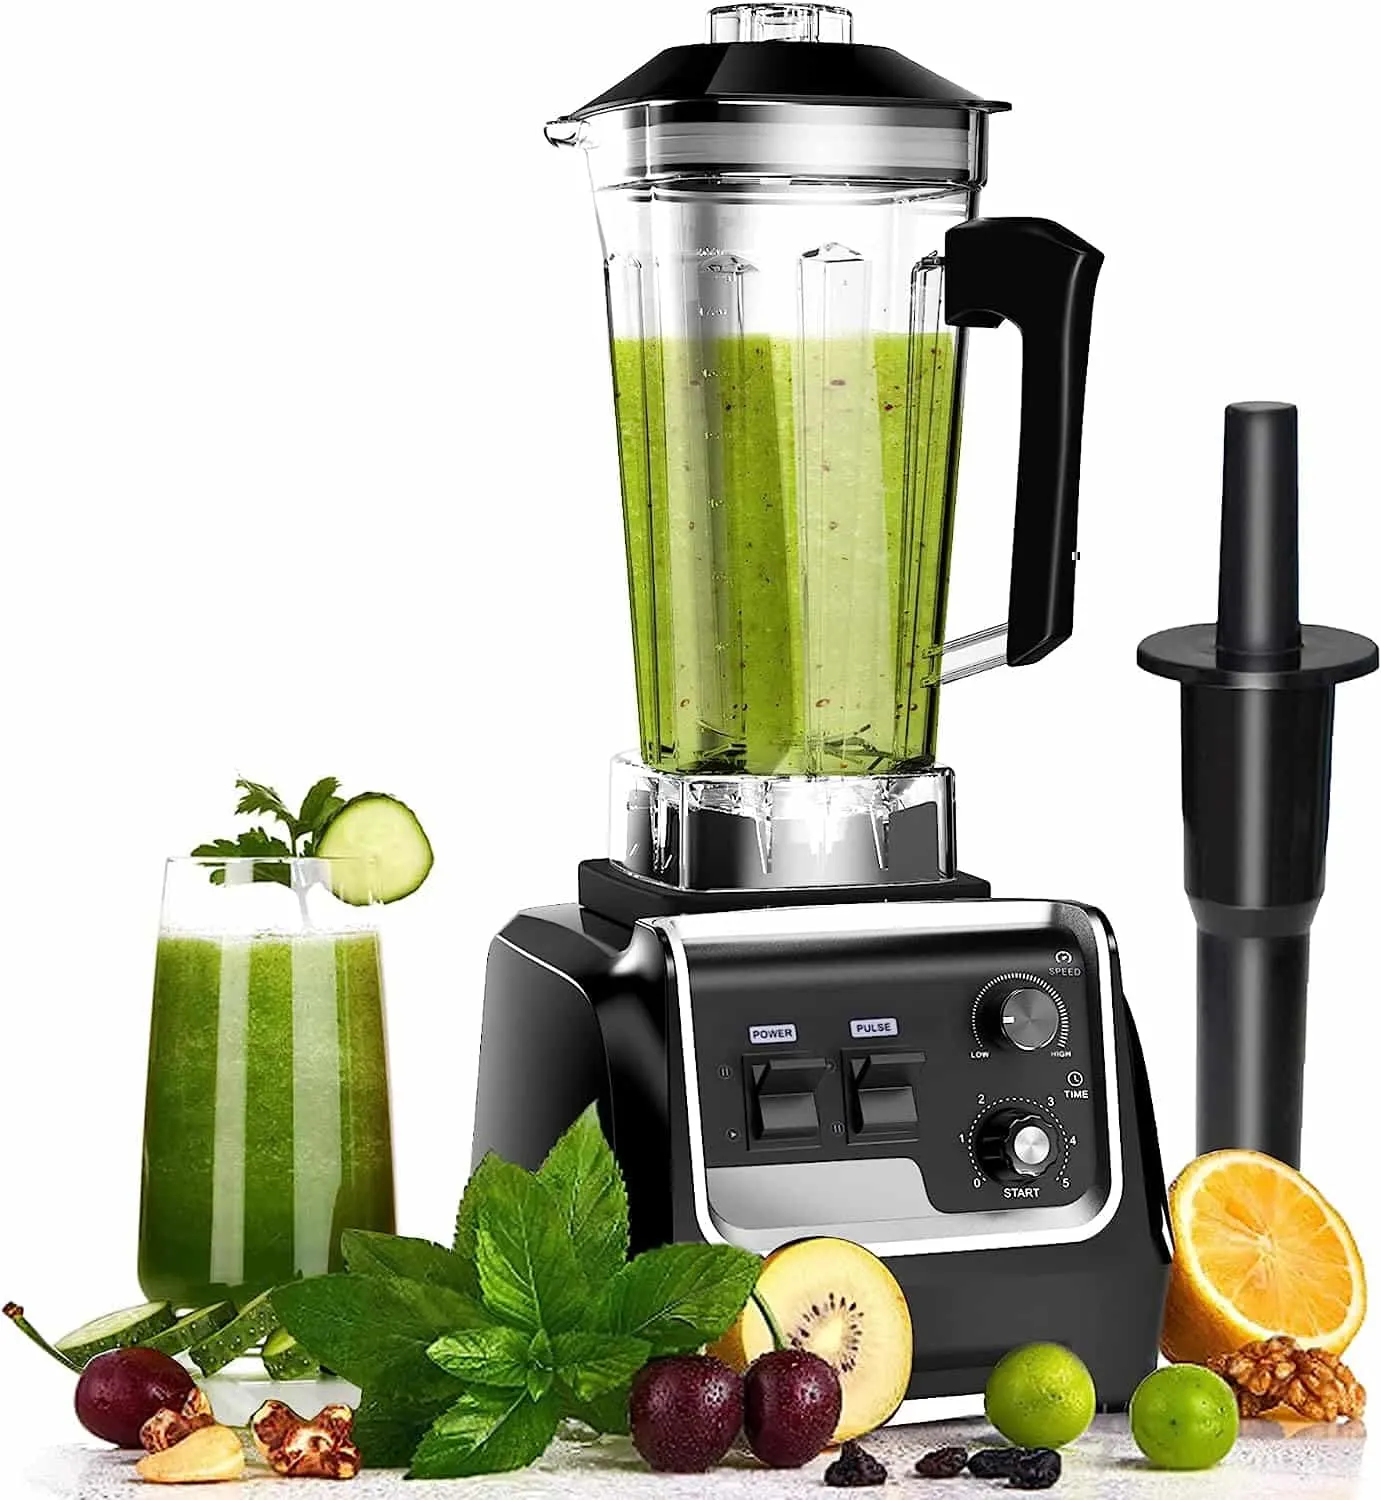 KOIOS 900W Countertop Blenders for Shakes and Smoothies, Protein